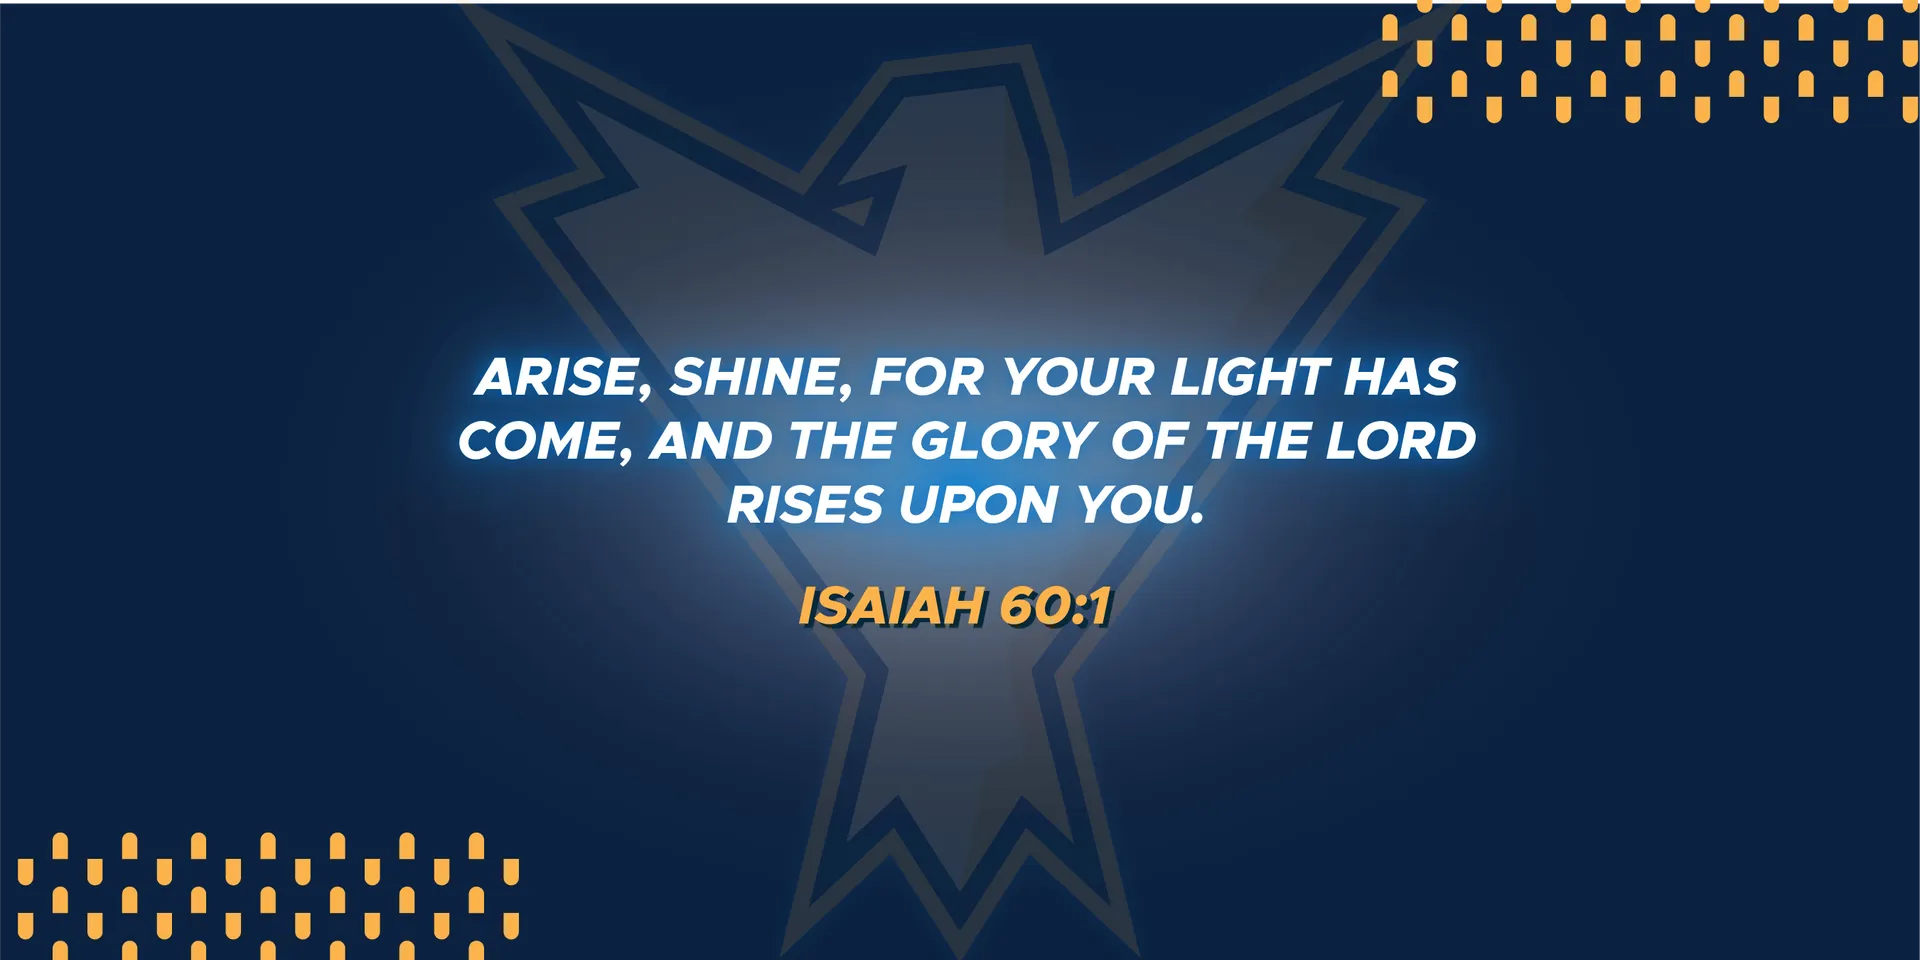 The theme verse of the event: Isaiah 60:1